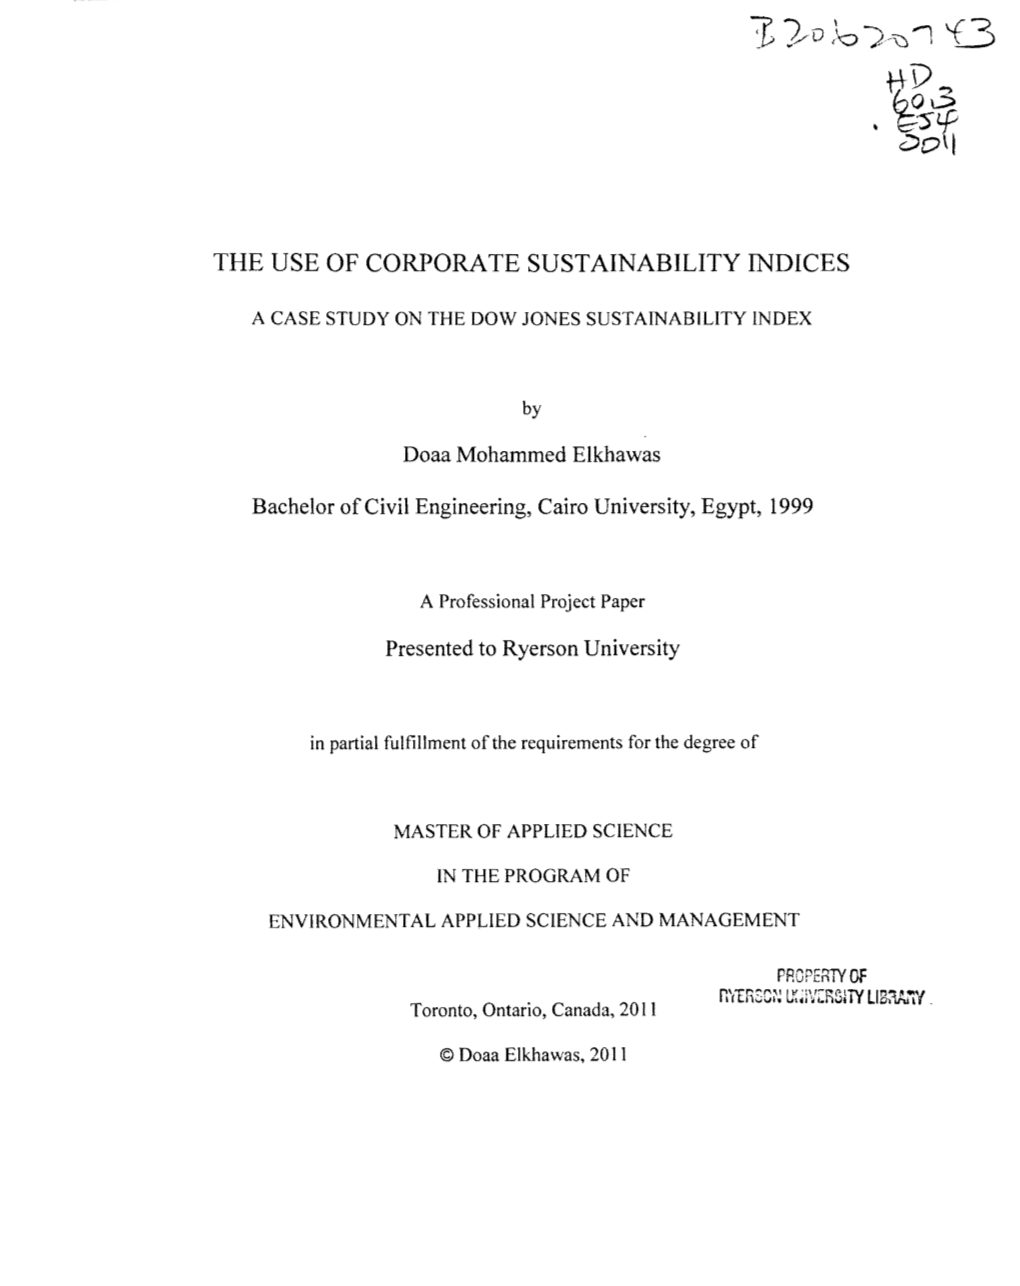 The Use of Corporate Sustainability Indices